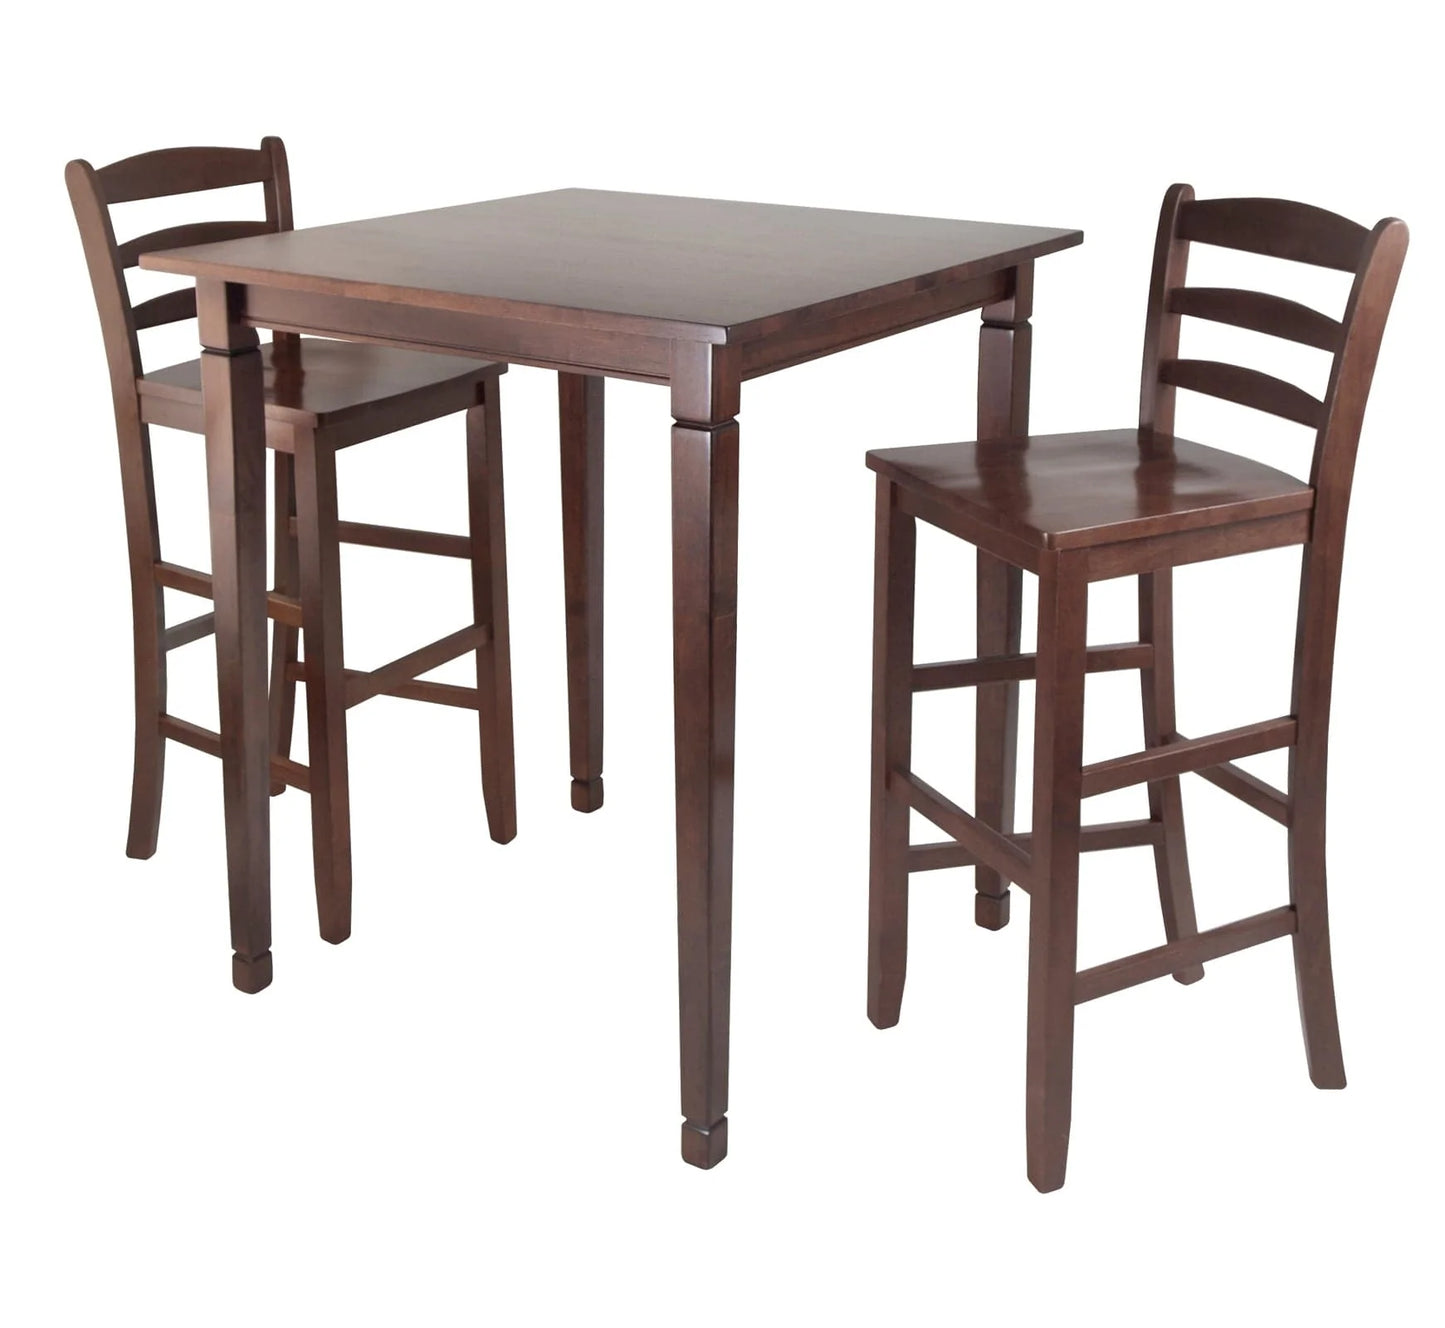 WINSOME Pub Table Set Kingsgate 3-Pc High Table with Ladder-back Bar Stools, Walnut